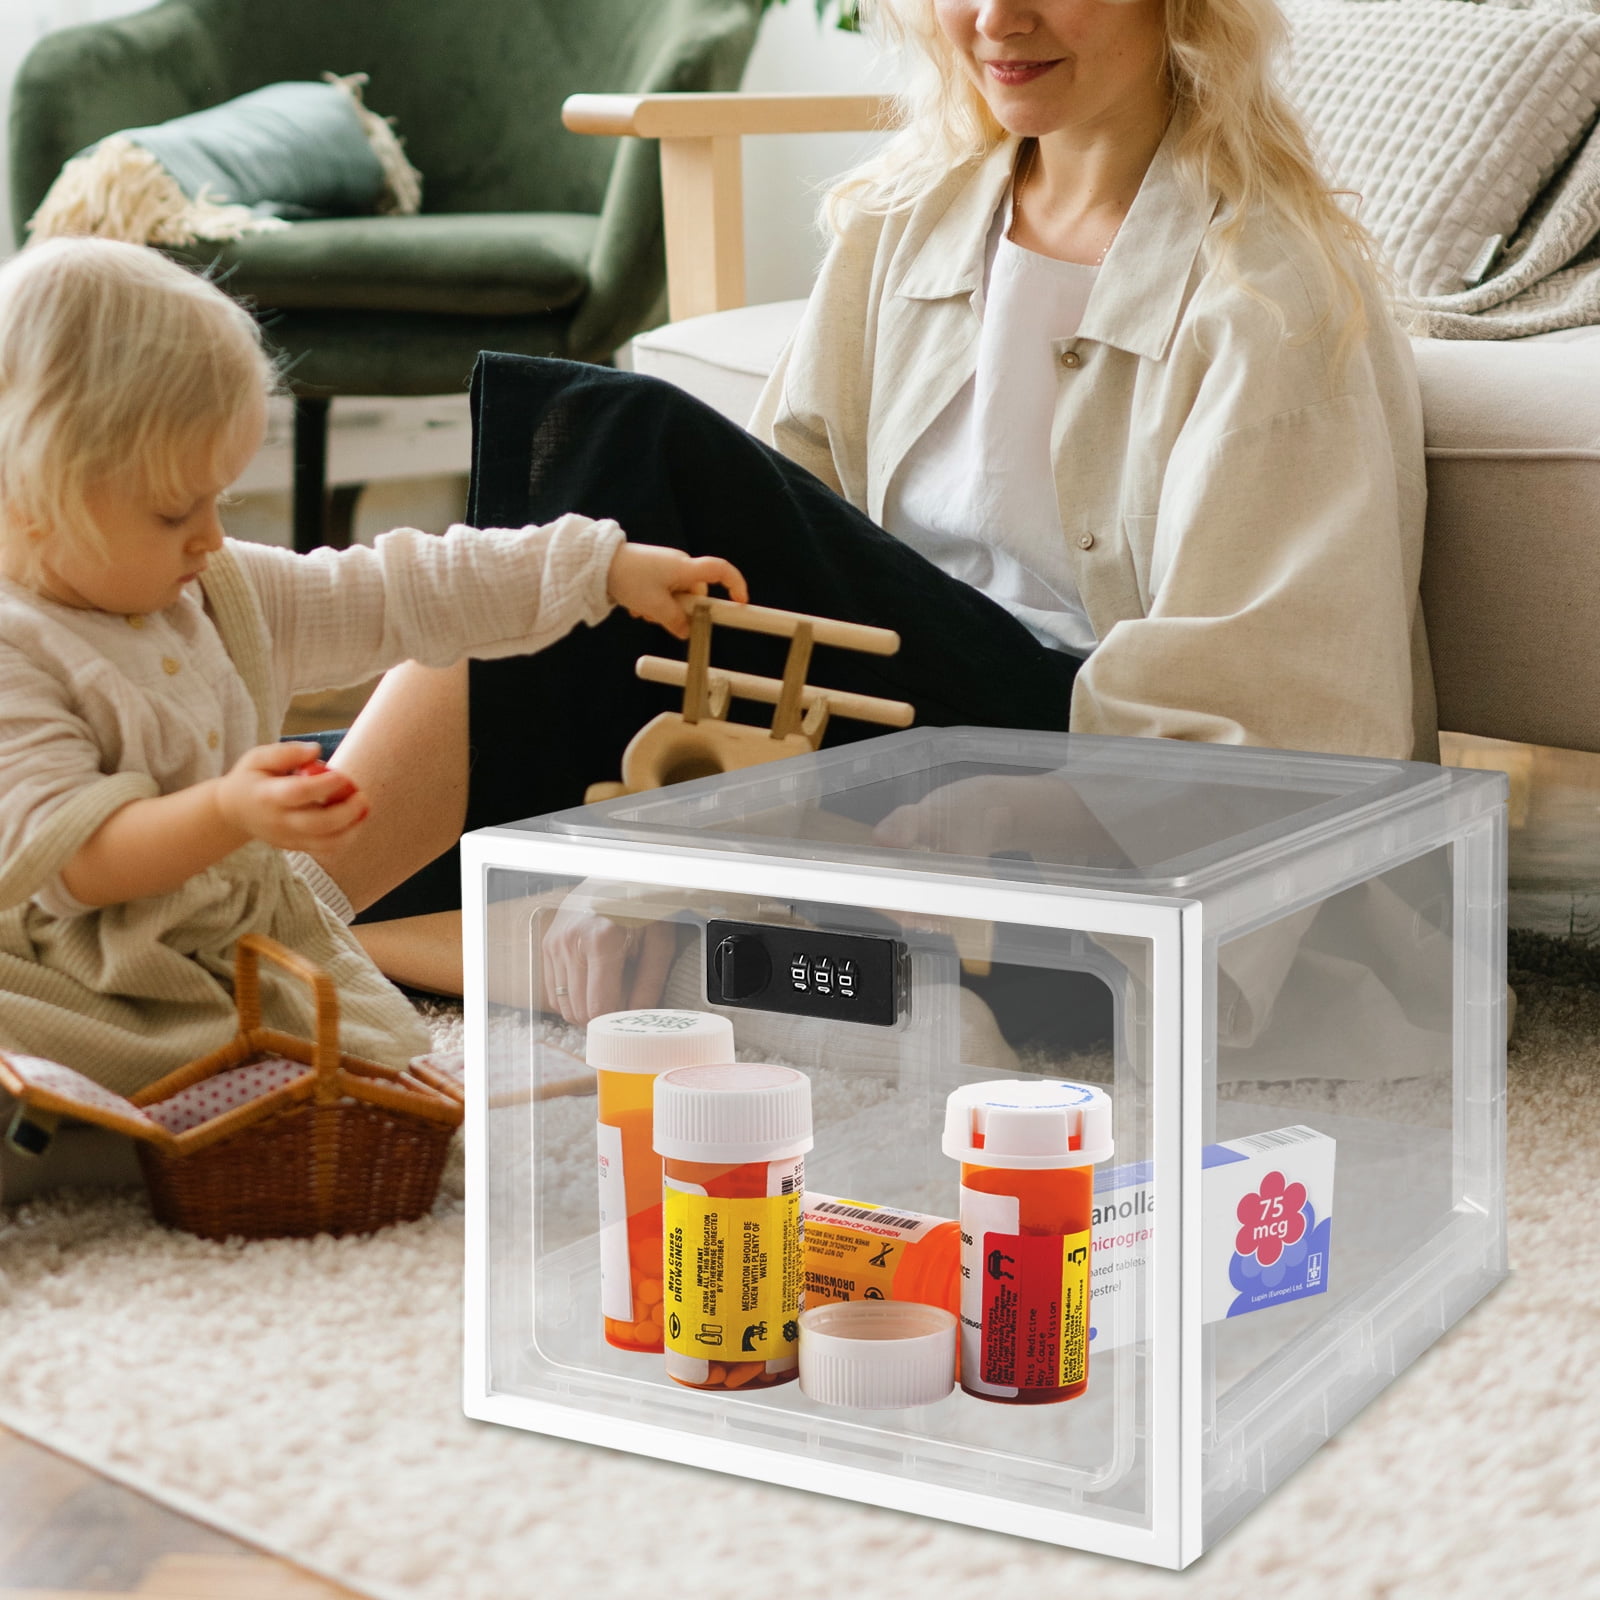  Marketing Holders Locking Medical Box for Medical Office or  Home Refrigerator Medicine Storage Case with Hardware 8 x 4.5 x 3 Clear  Acrylic Insulin and Vaccine Holder : Industrial & Scientific